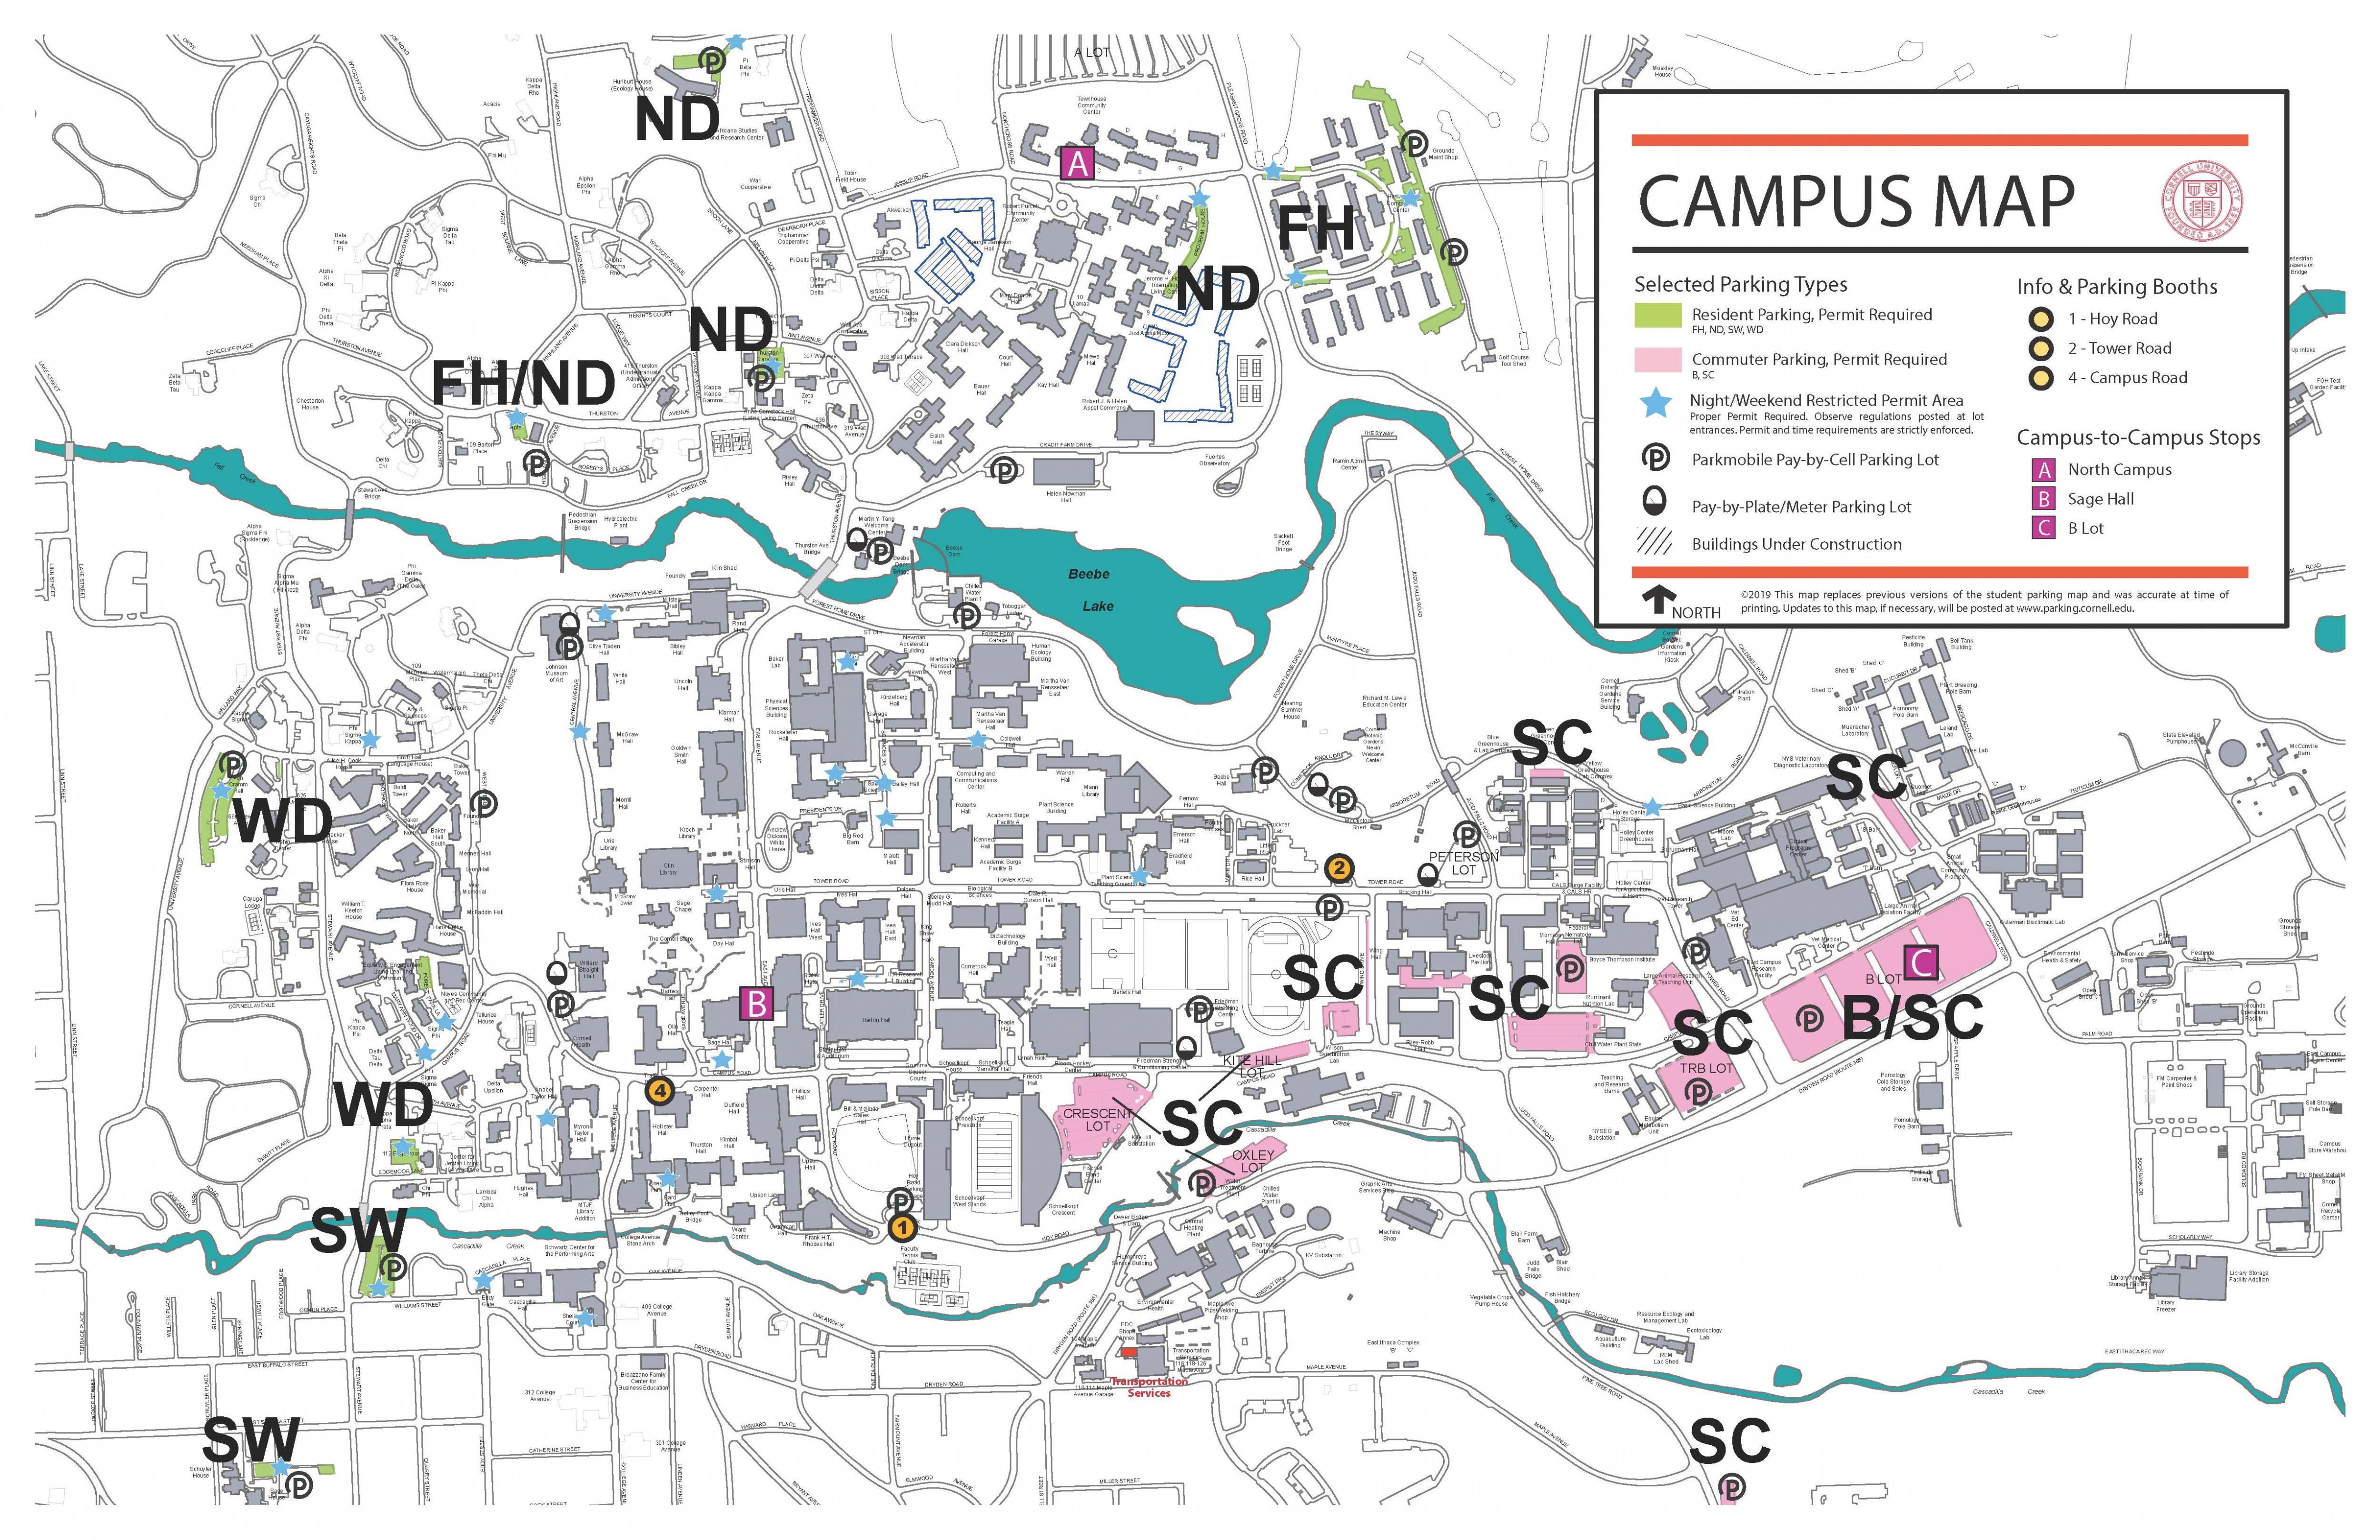 Parking Facilities And Campus Services